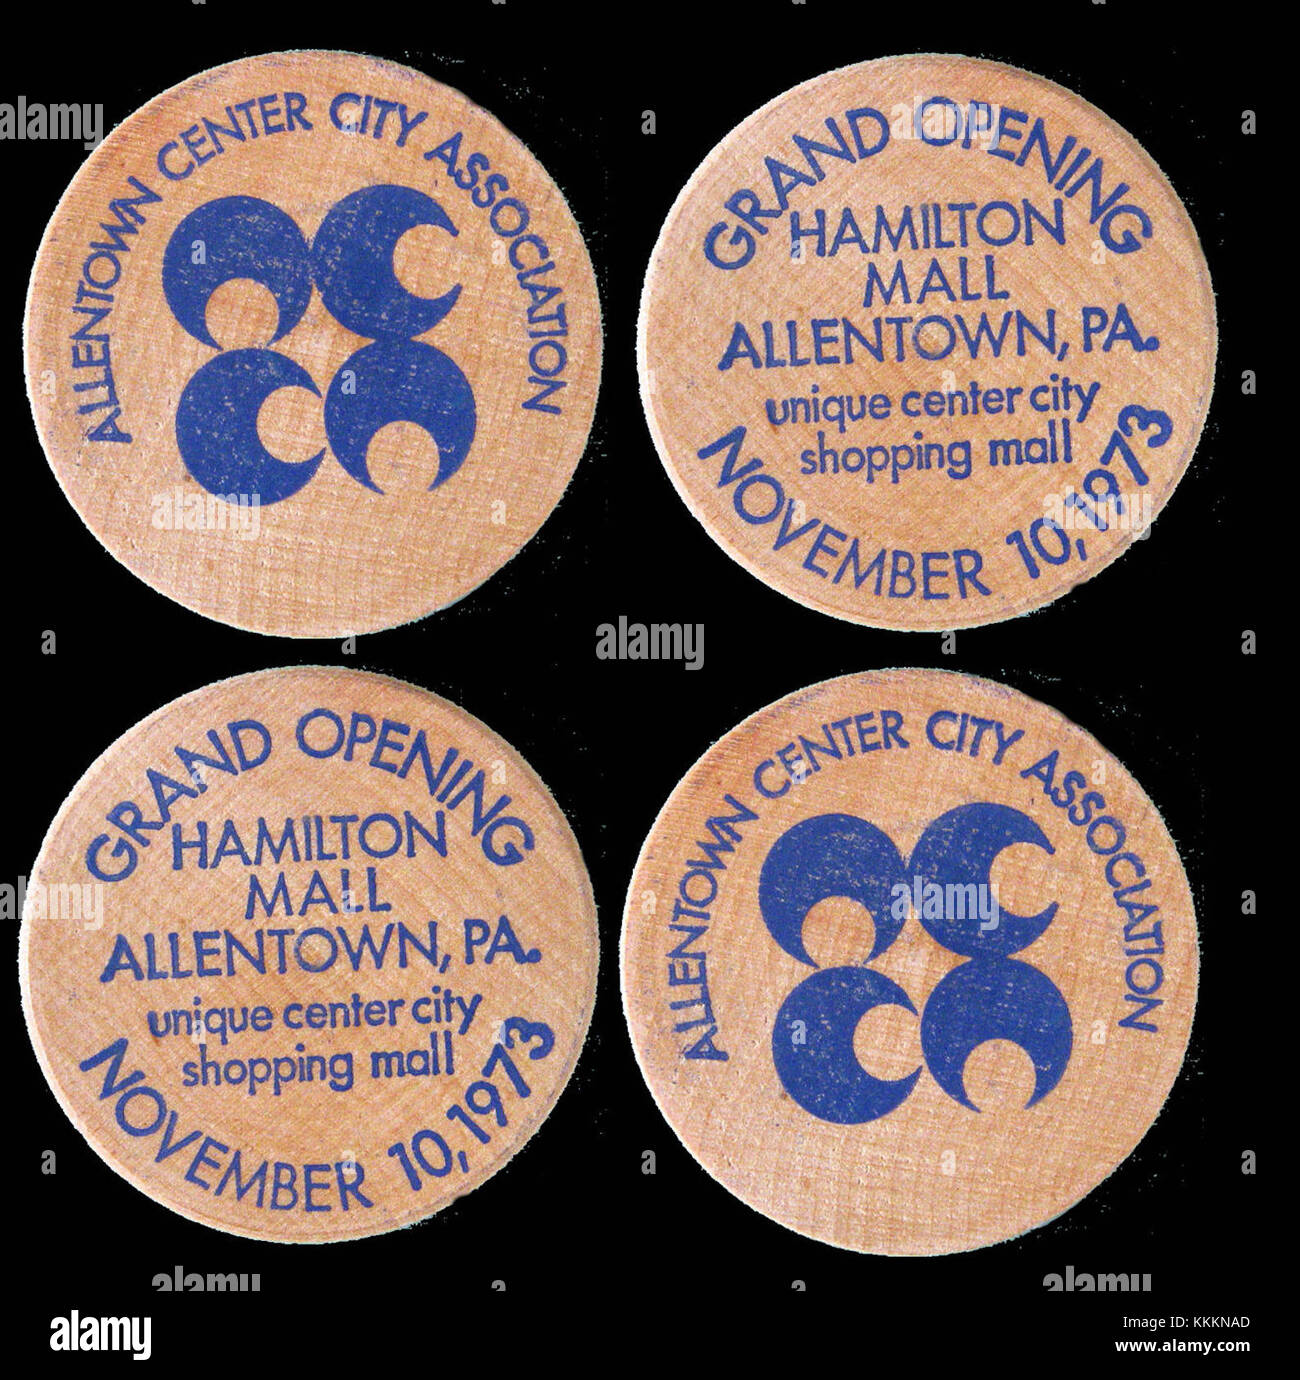 1973 - Hamilton Mall - Opening Wooden Nickle - Allentown PA Stock Photo